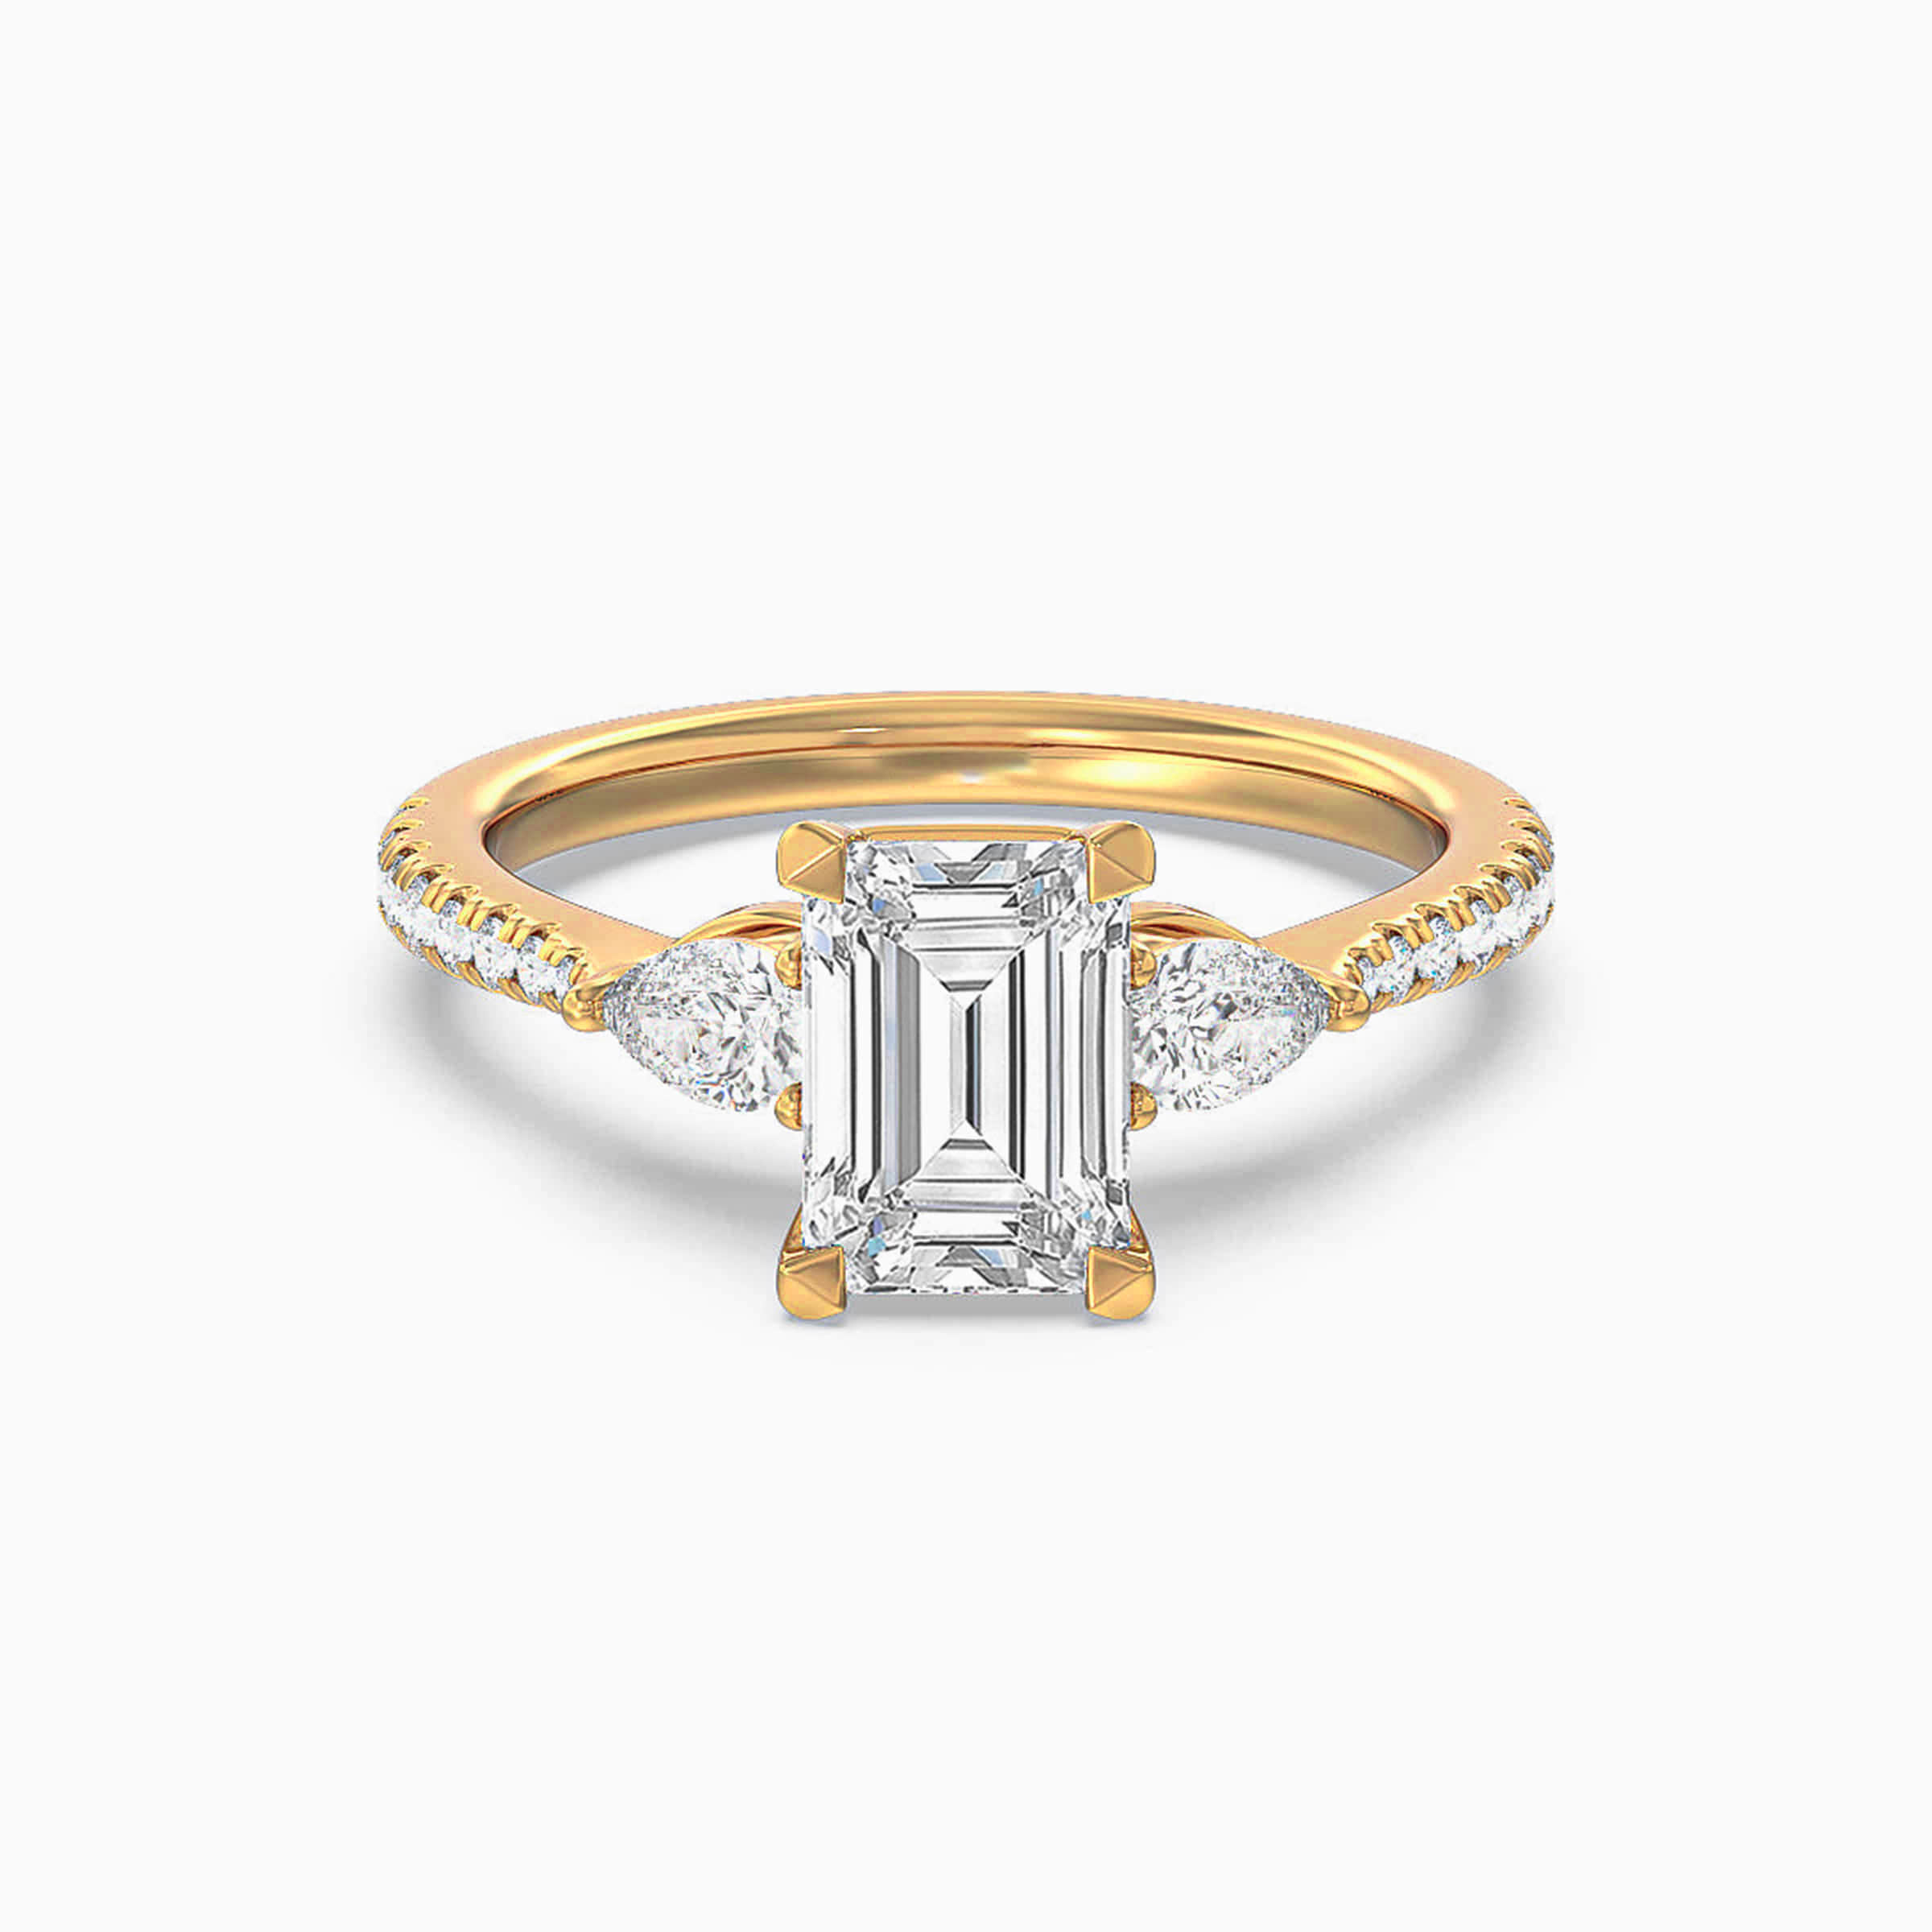 Darry Ring three stone engagement ring yellow gold